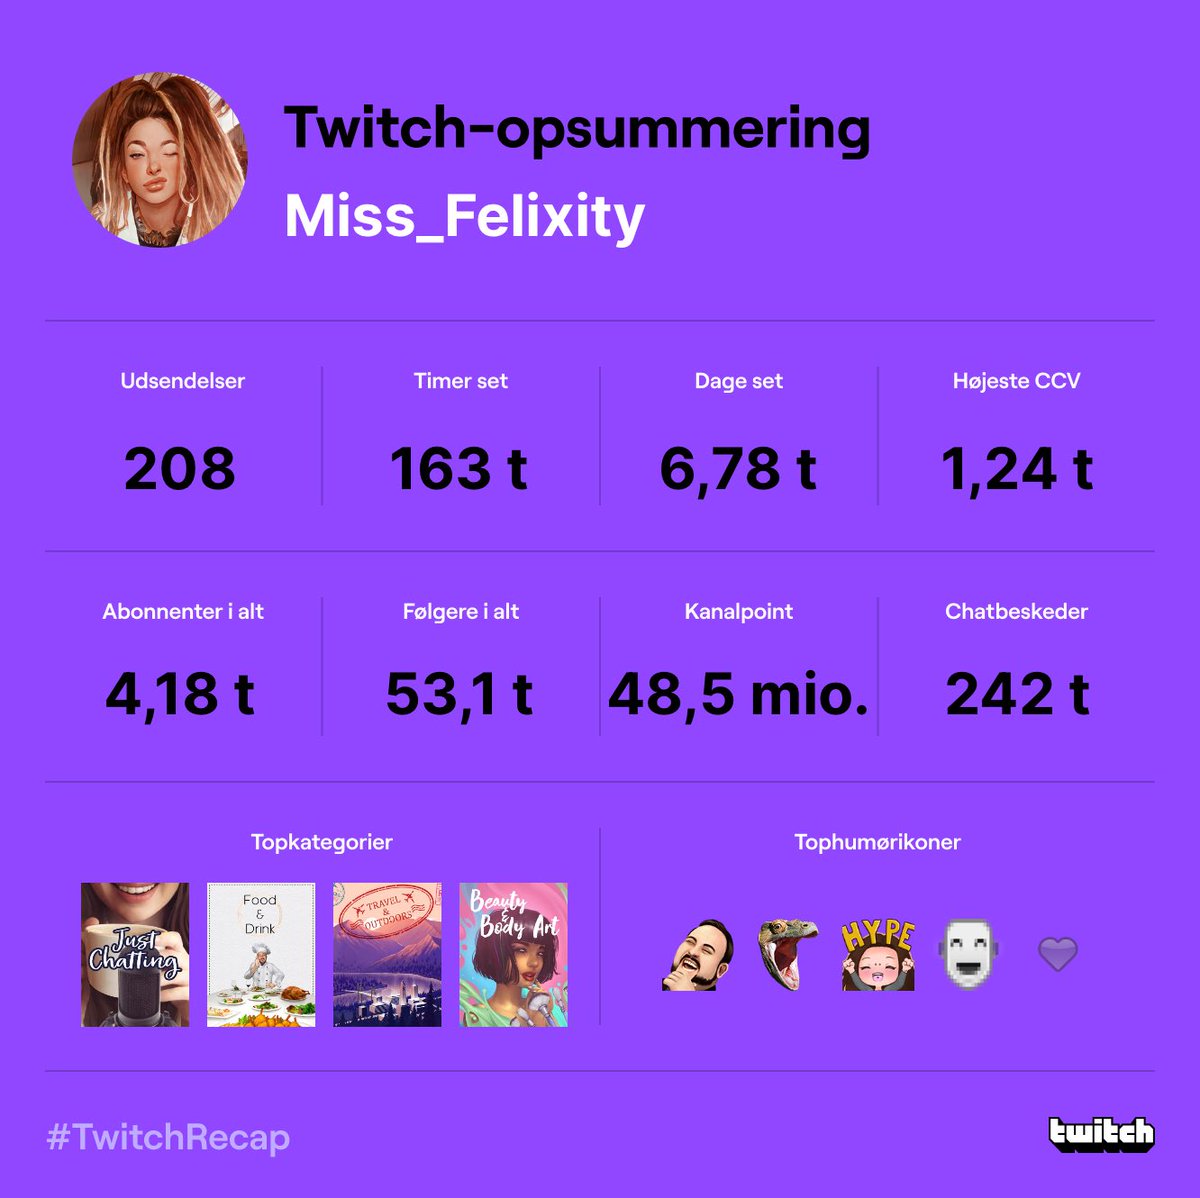 Wow 🥺🙏🏻 thank you for the love and support !! 

#TwitchRecap #TwitchRecap2022